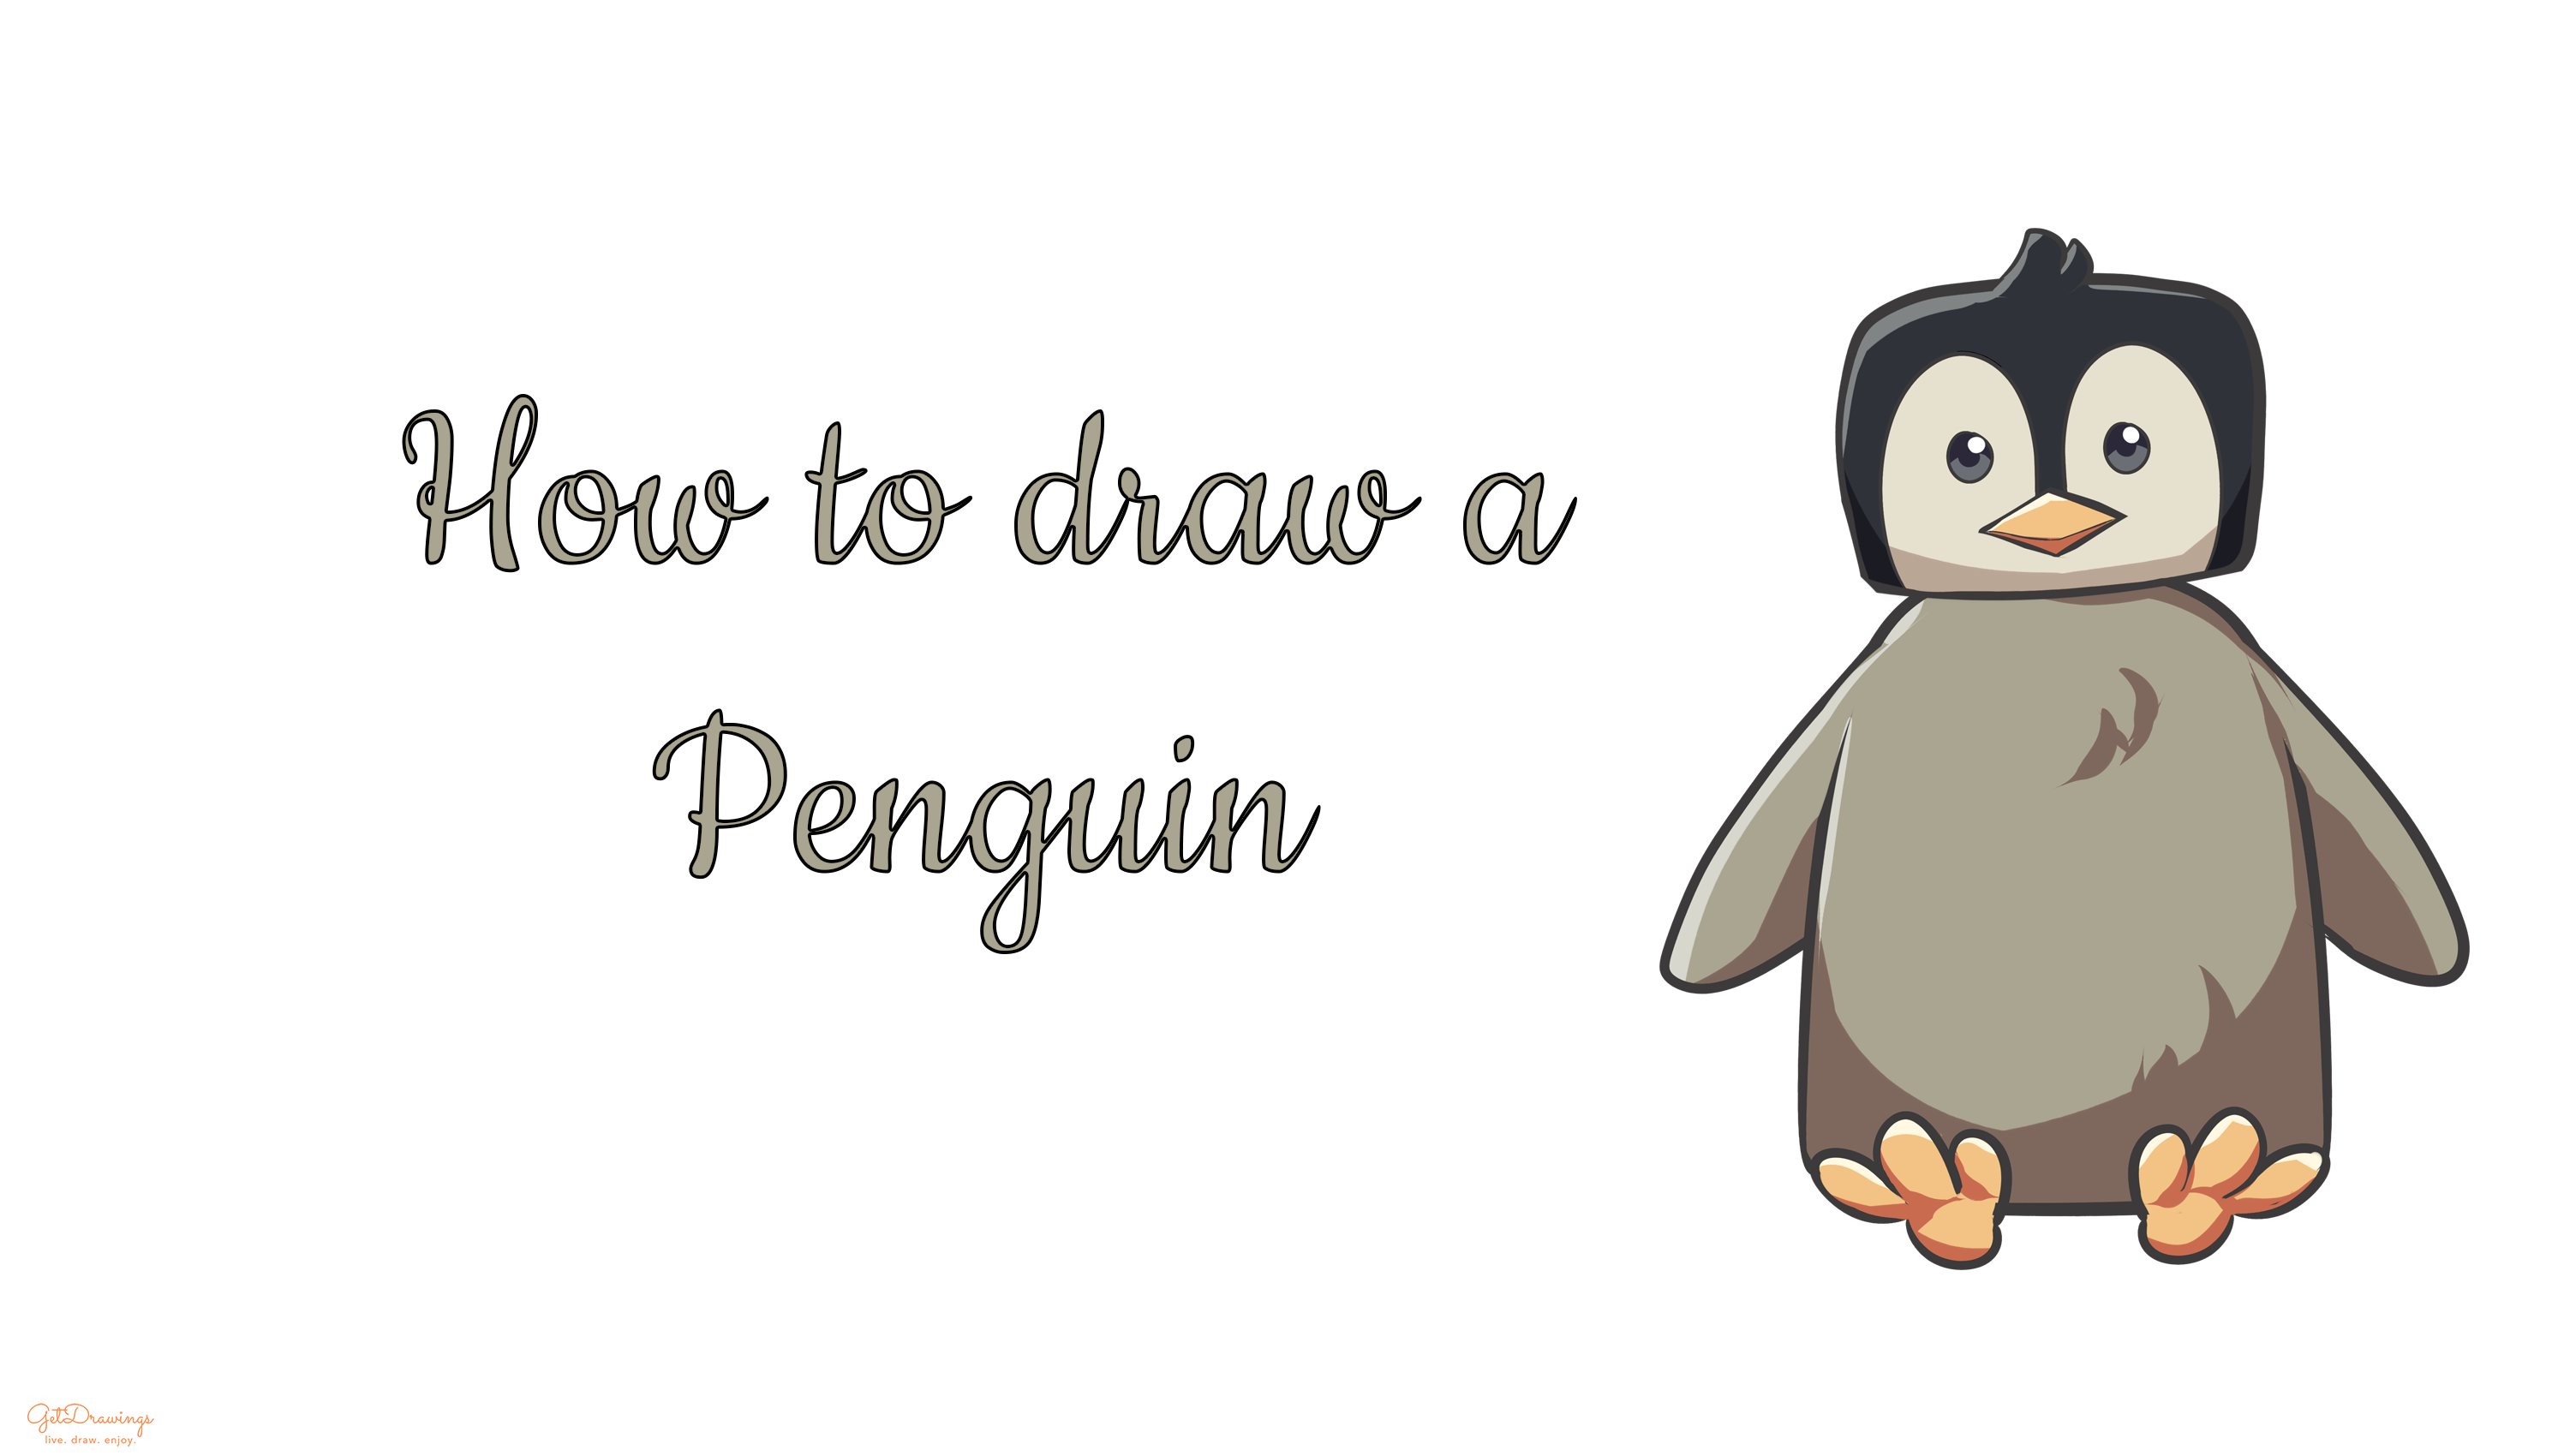 How to draw a Penguin?